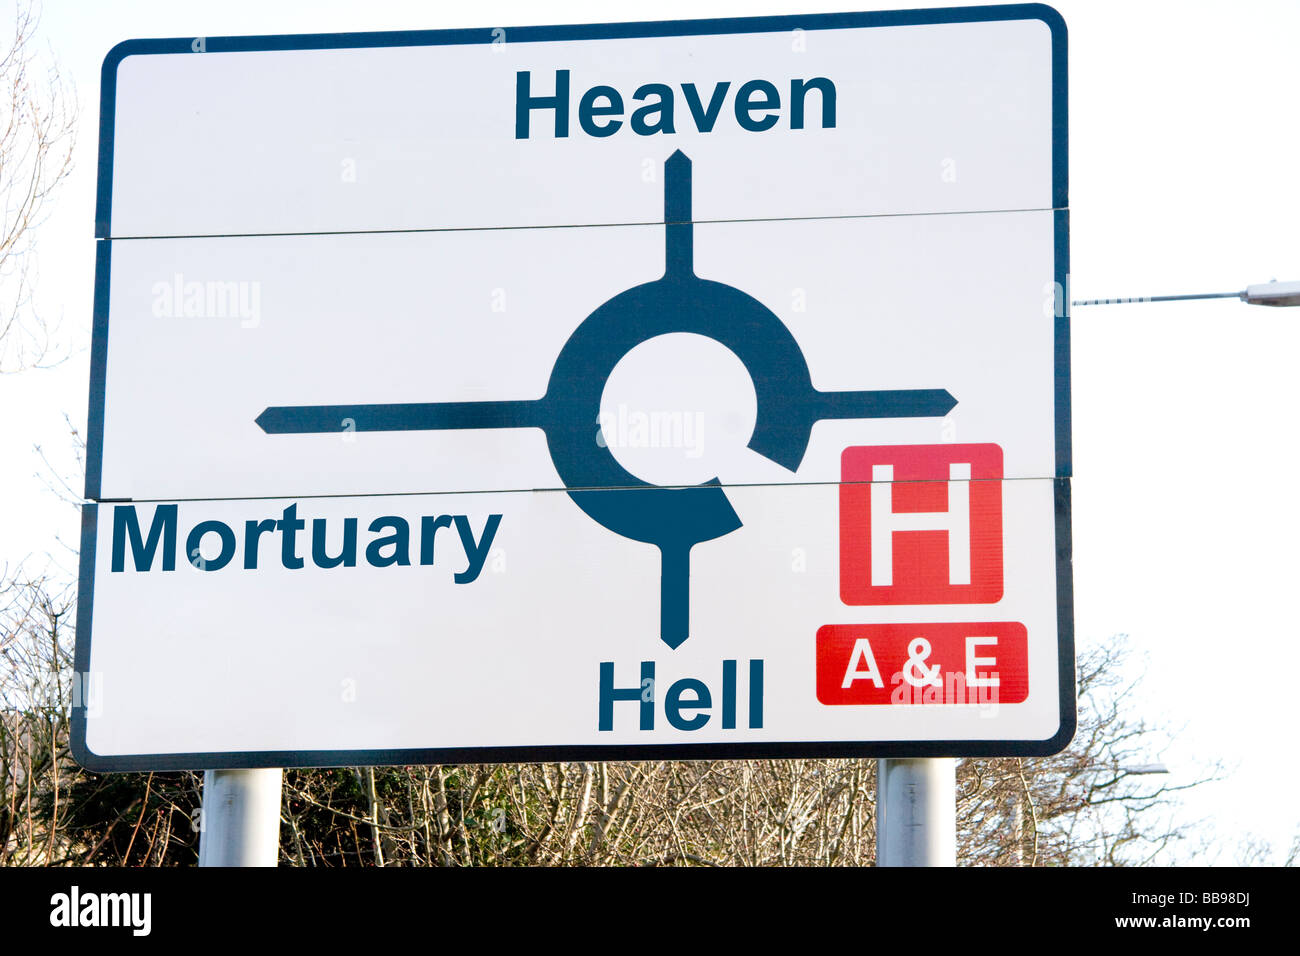 Road sign showing hospital mortuary heaven and hell Stock Photo